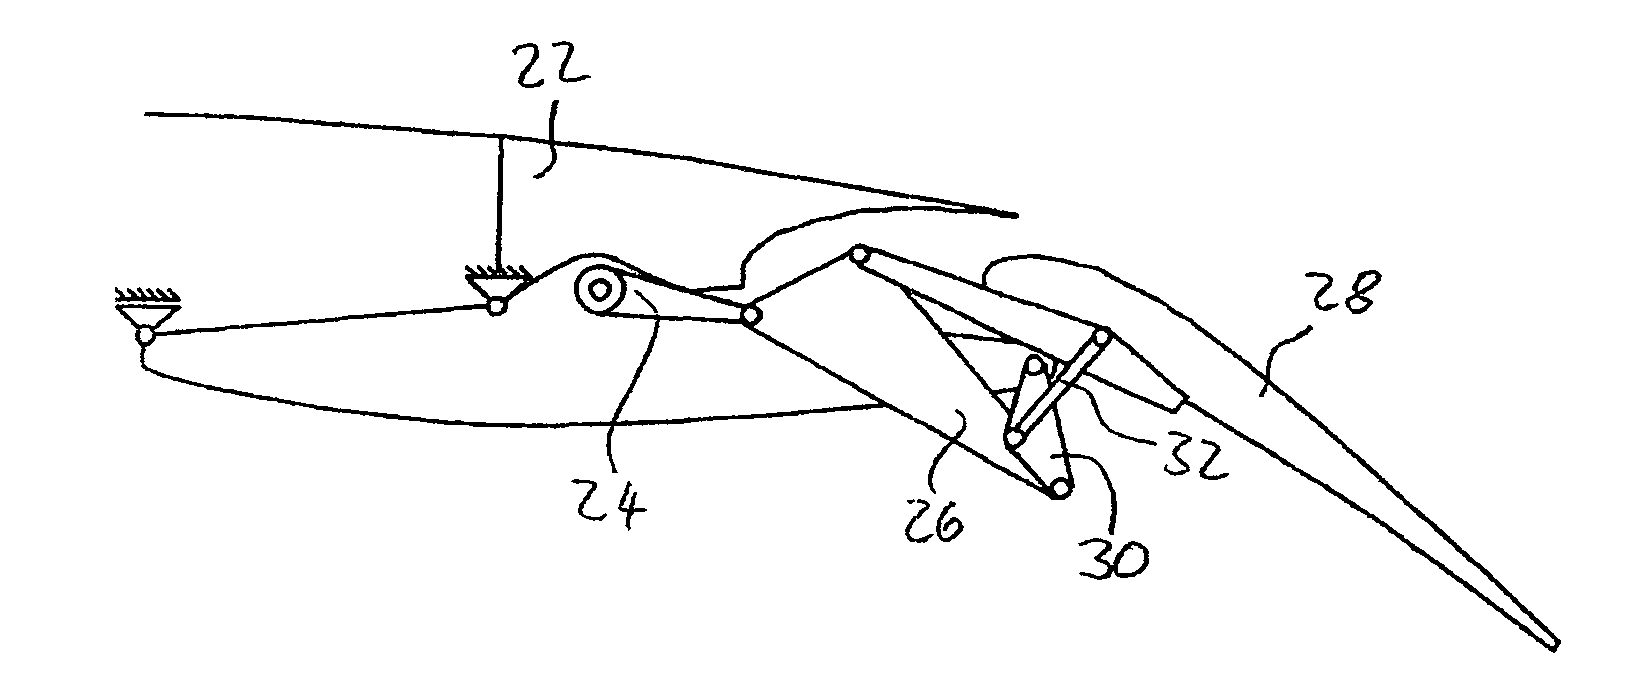 Drive and guide arrangement for a flap which is arranged on an aircraft mainplane